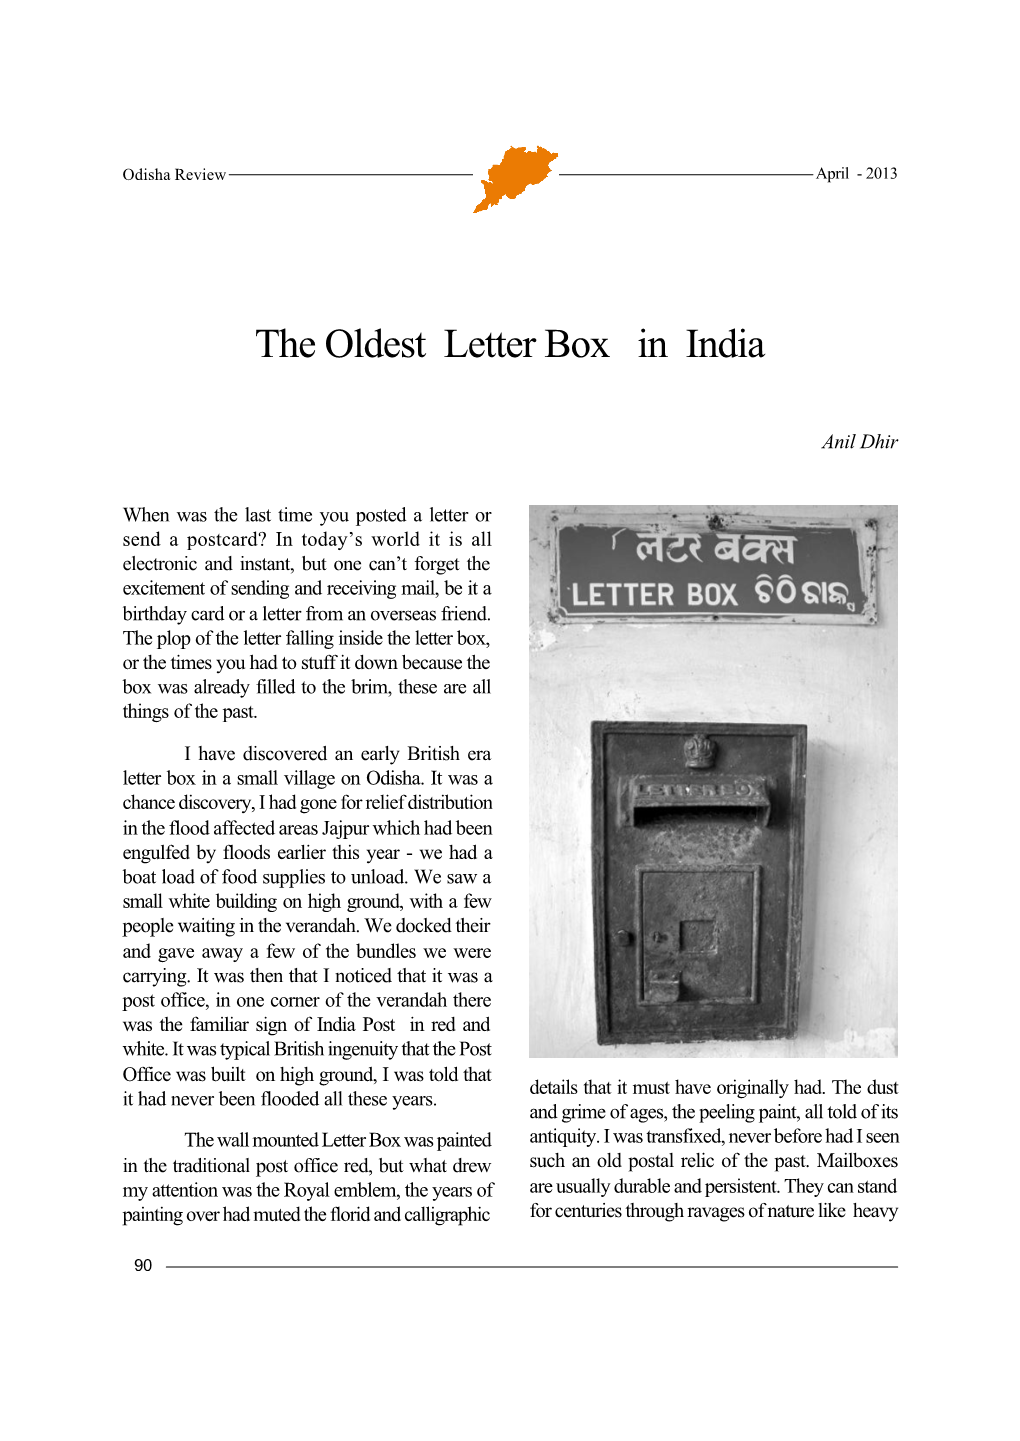 The Oldest Letter Box in India